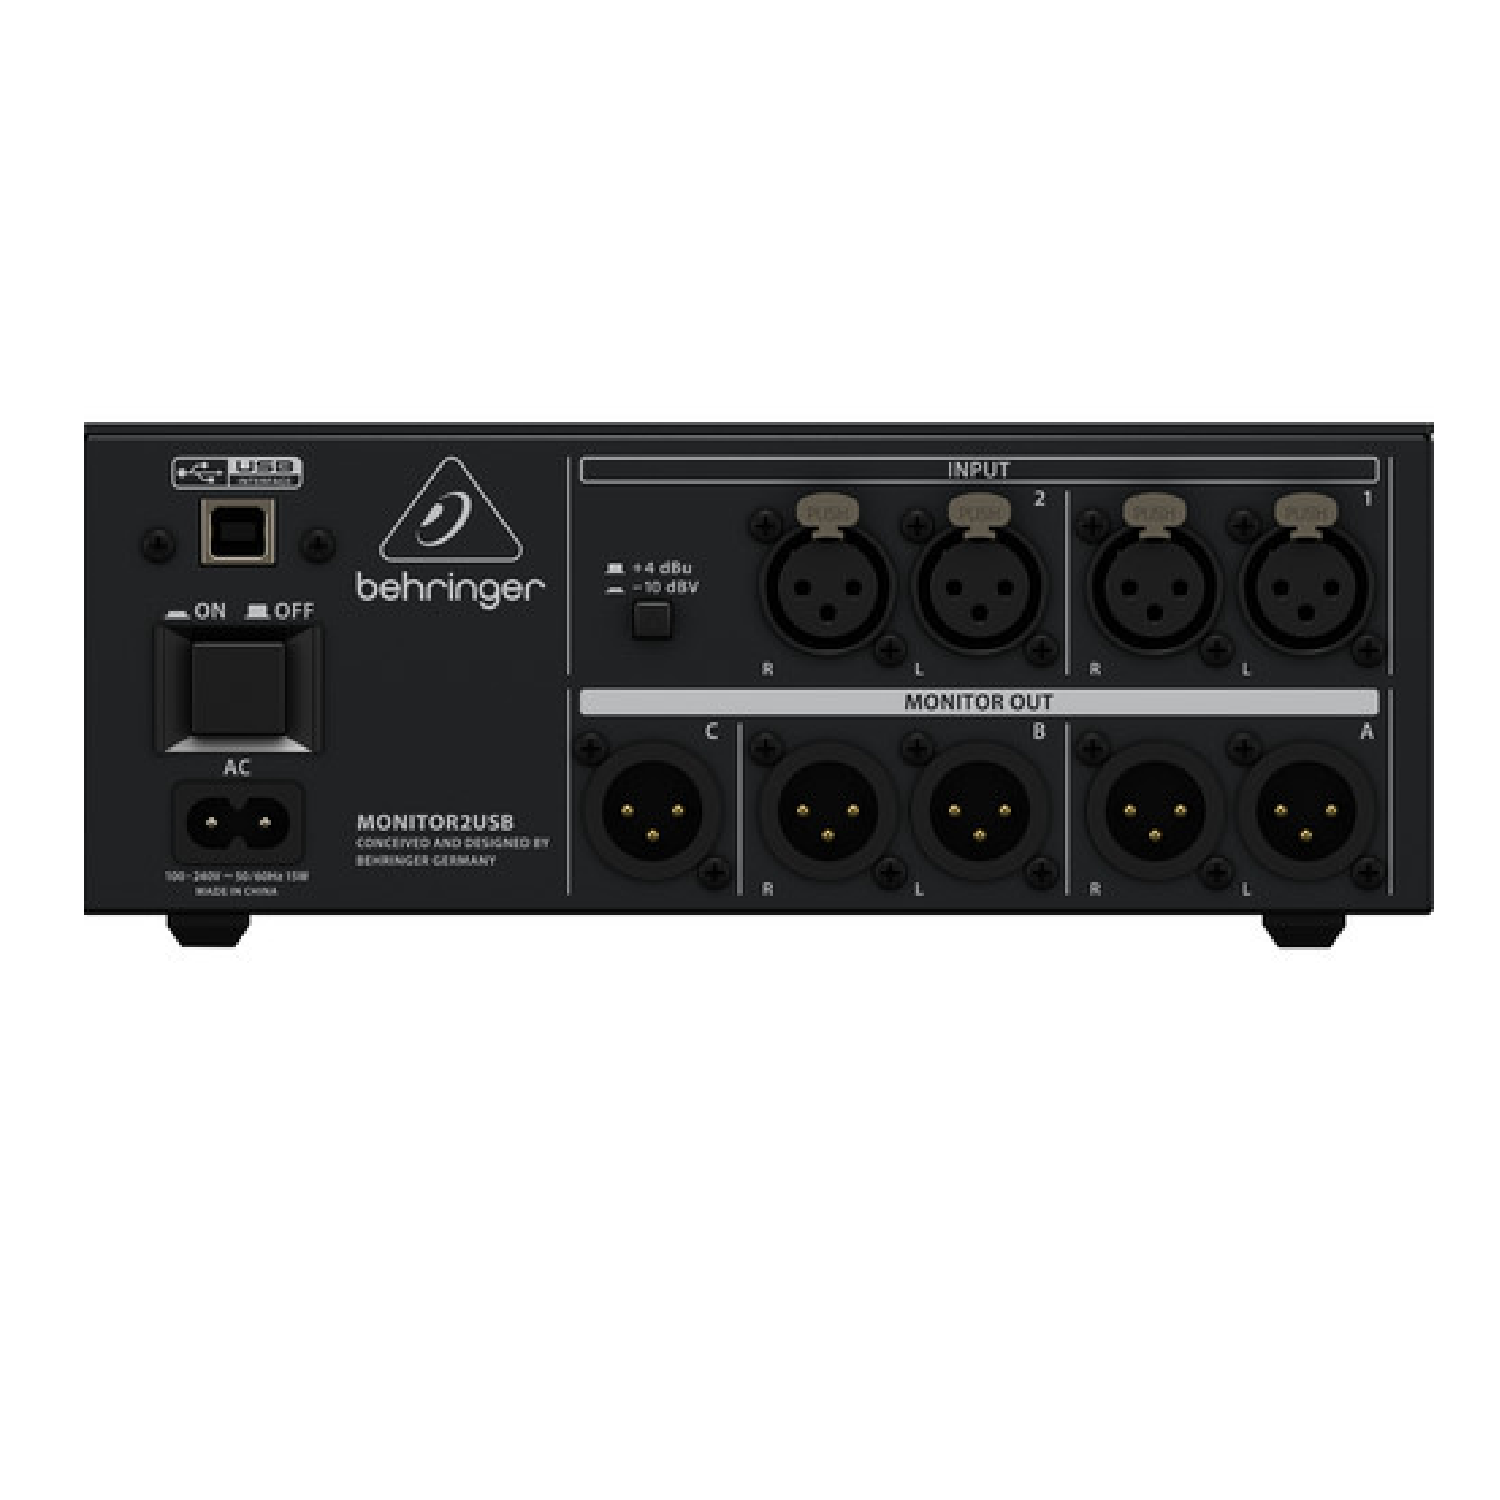 High End speaker &amp; Headphone Monitoring Controller with VCA Control &amp; USB Audio Interface   MONITOR 2 USB behringer